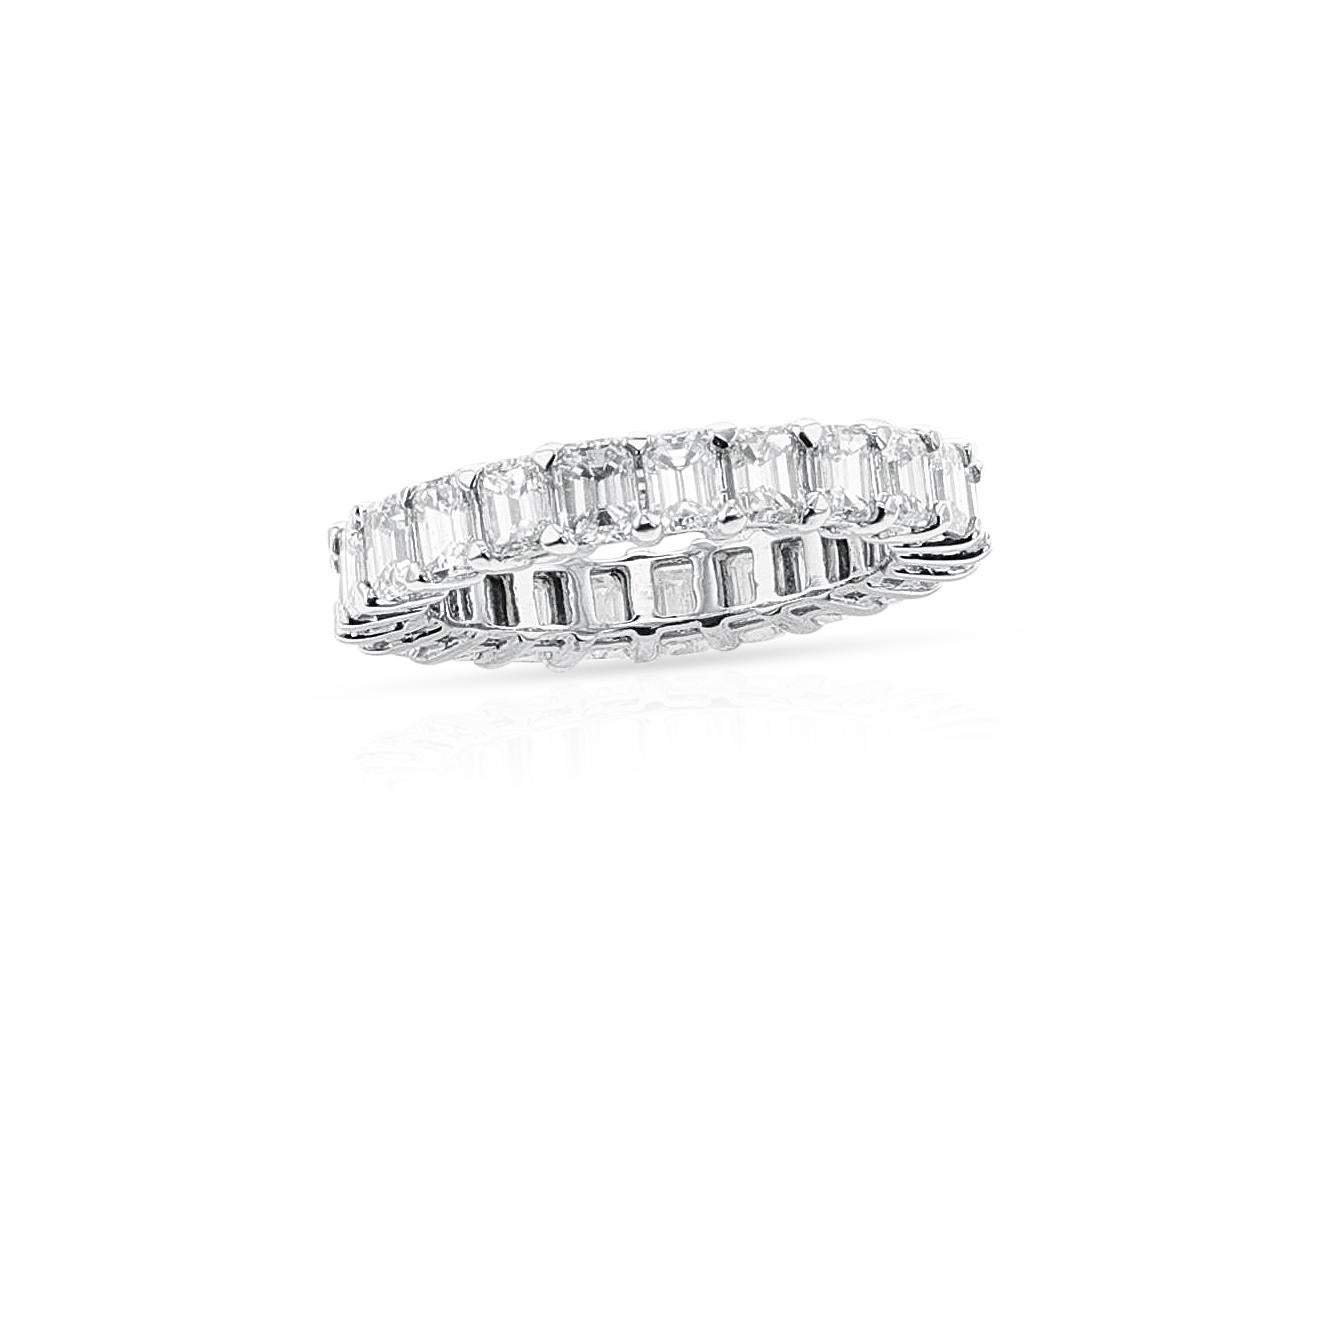 Emerald-Cut 4.61 ct. Diamond Eternity Band, 18k White Gold  For Sale 2